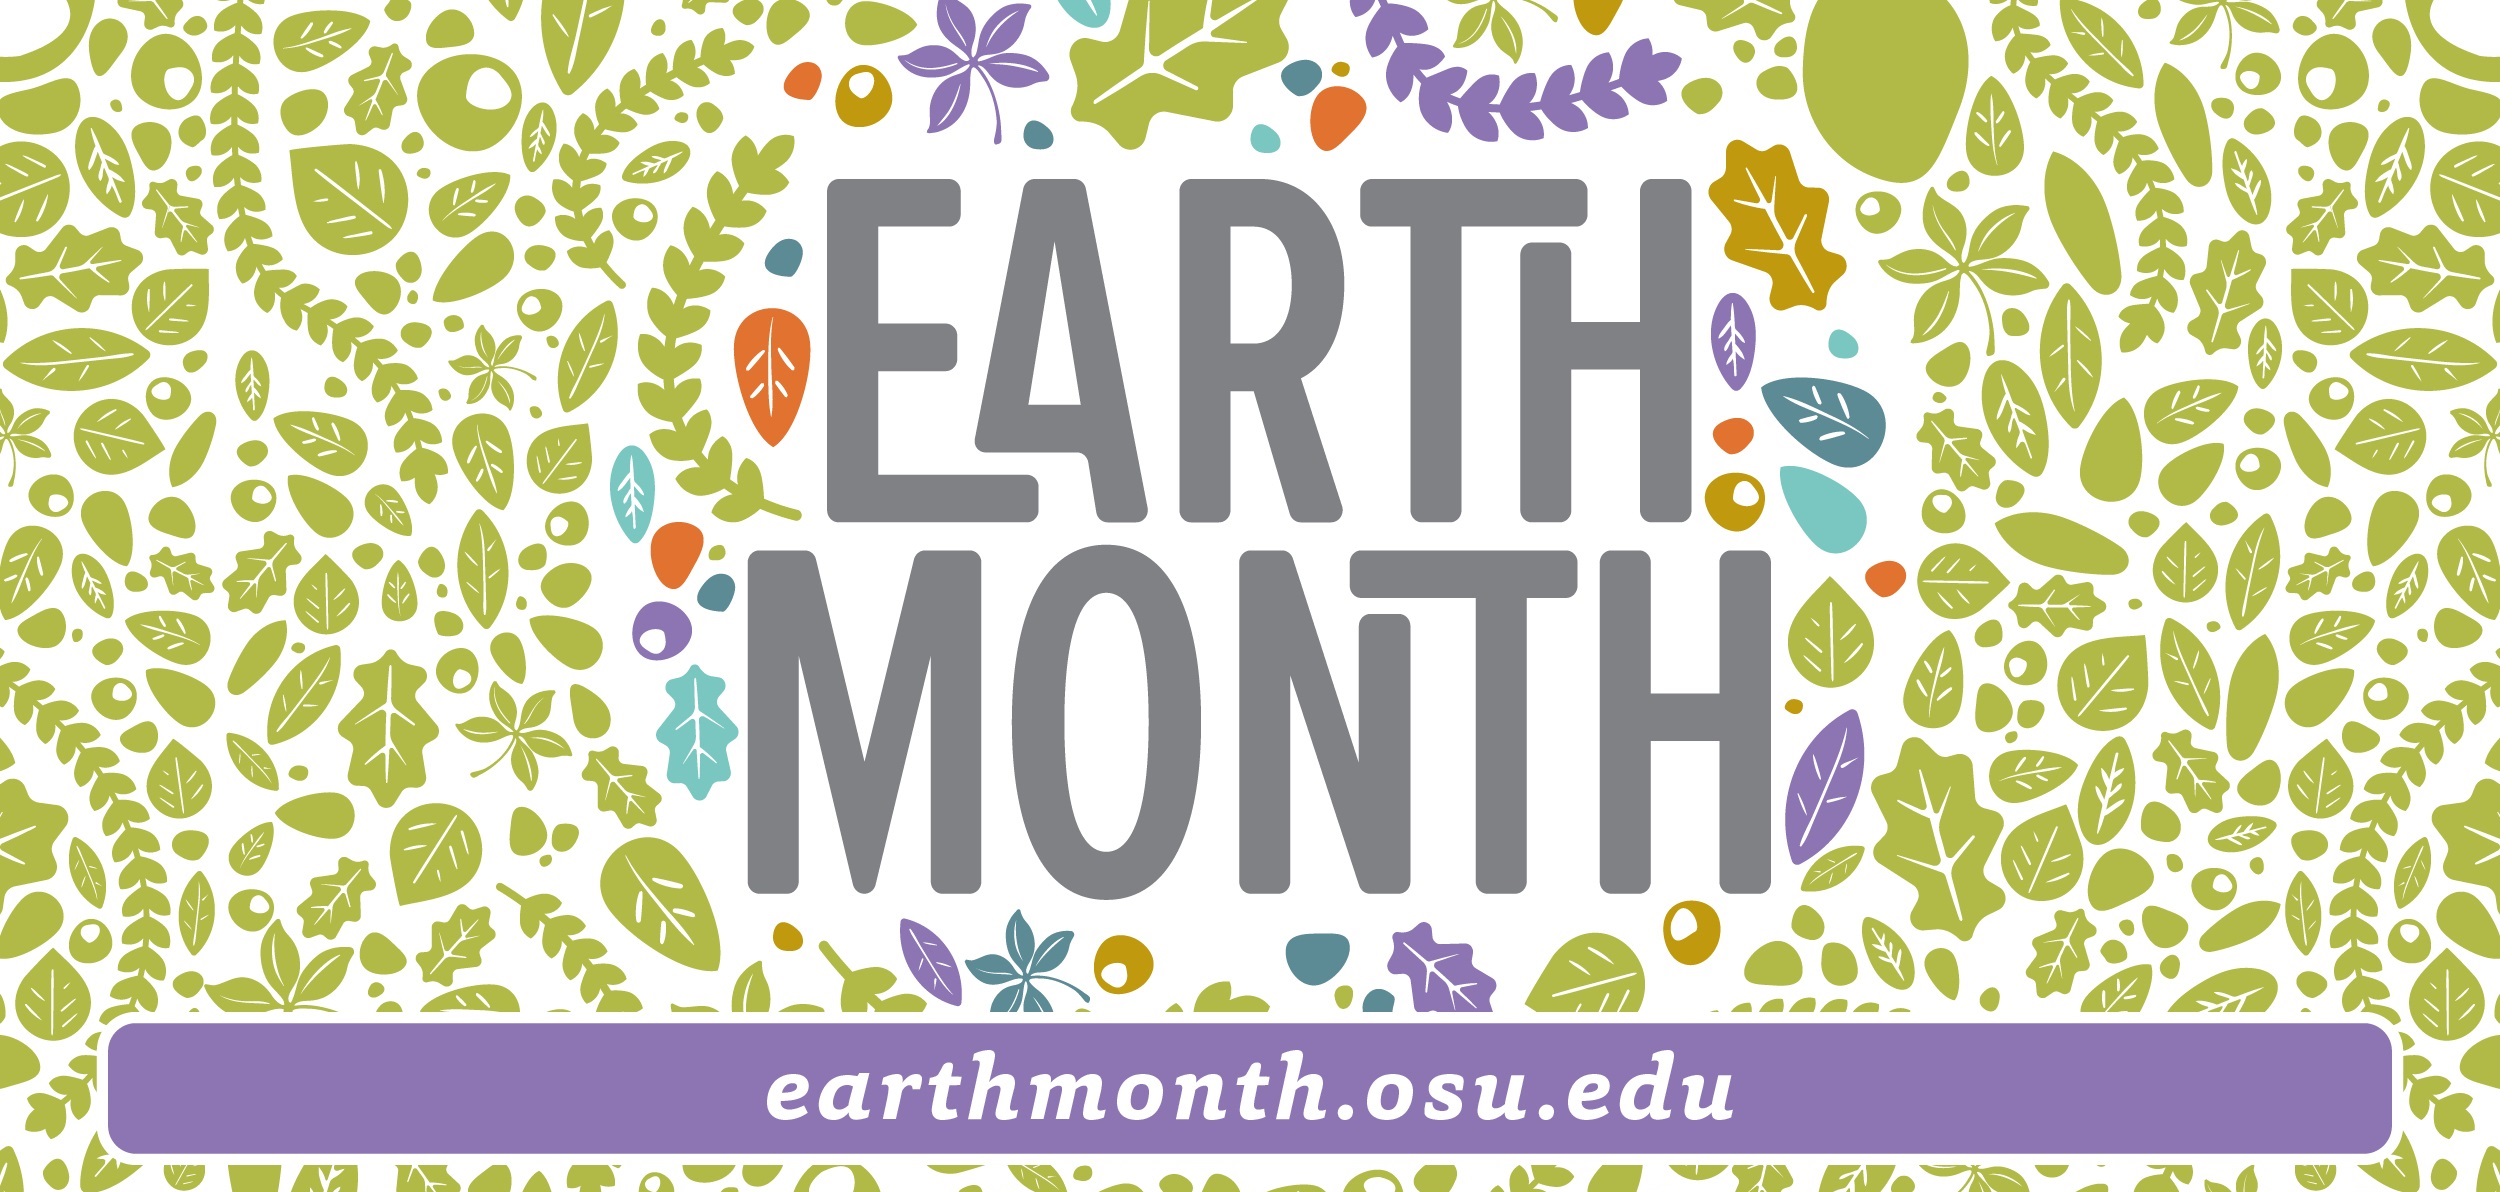 Celebrate Earth Month this April! Green Buckeyes